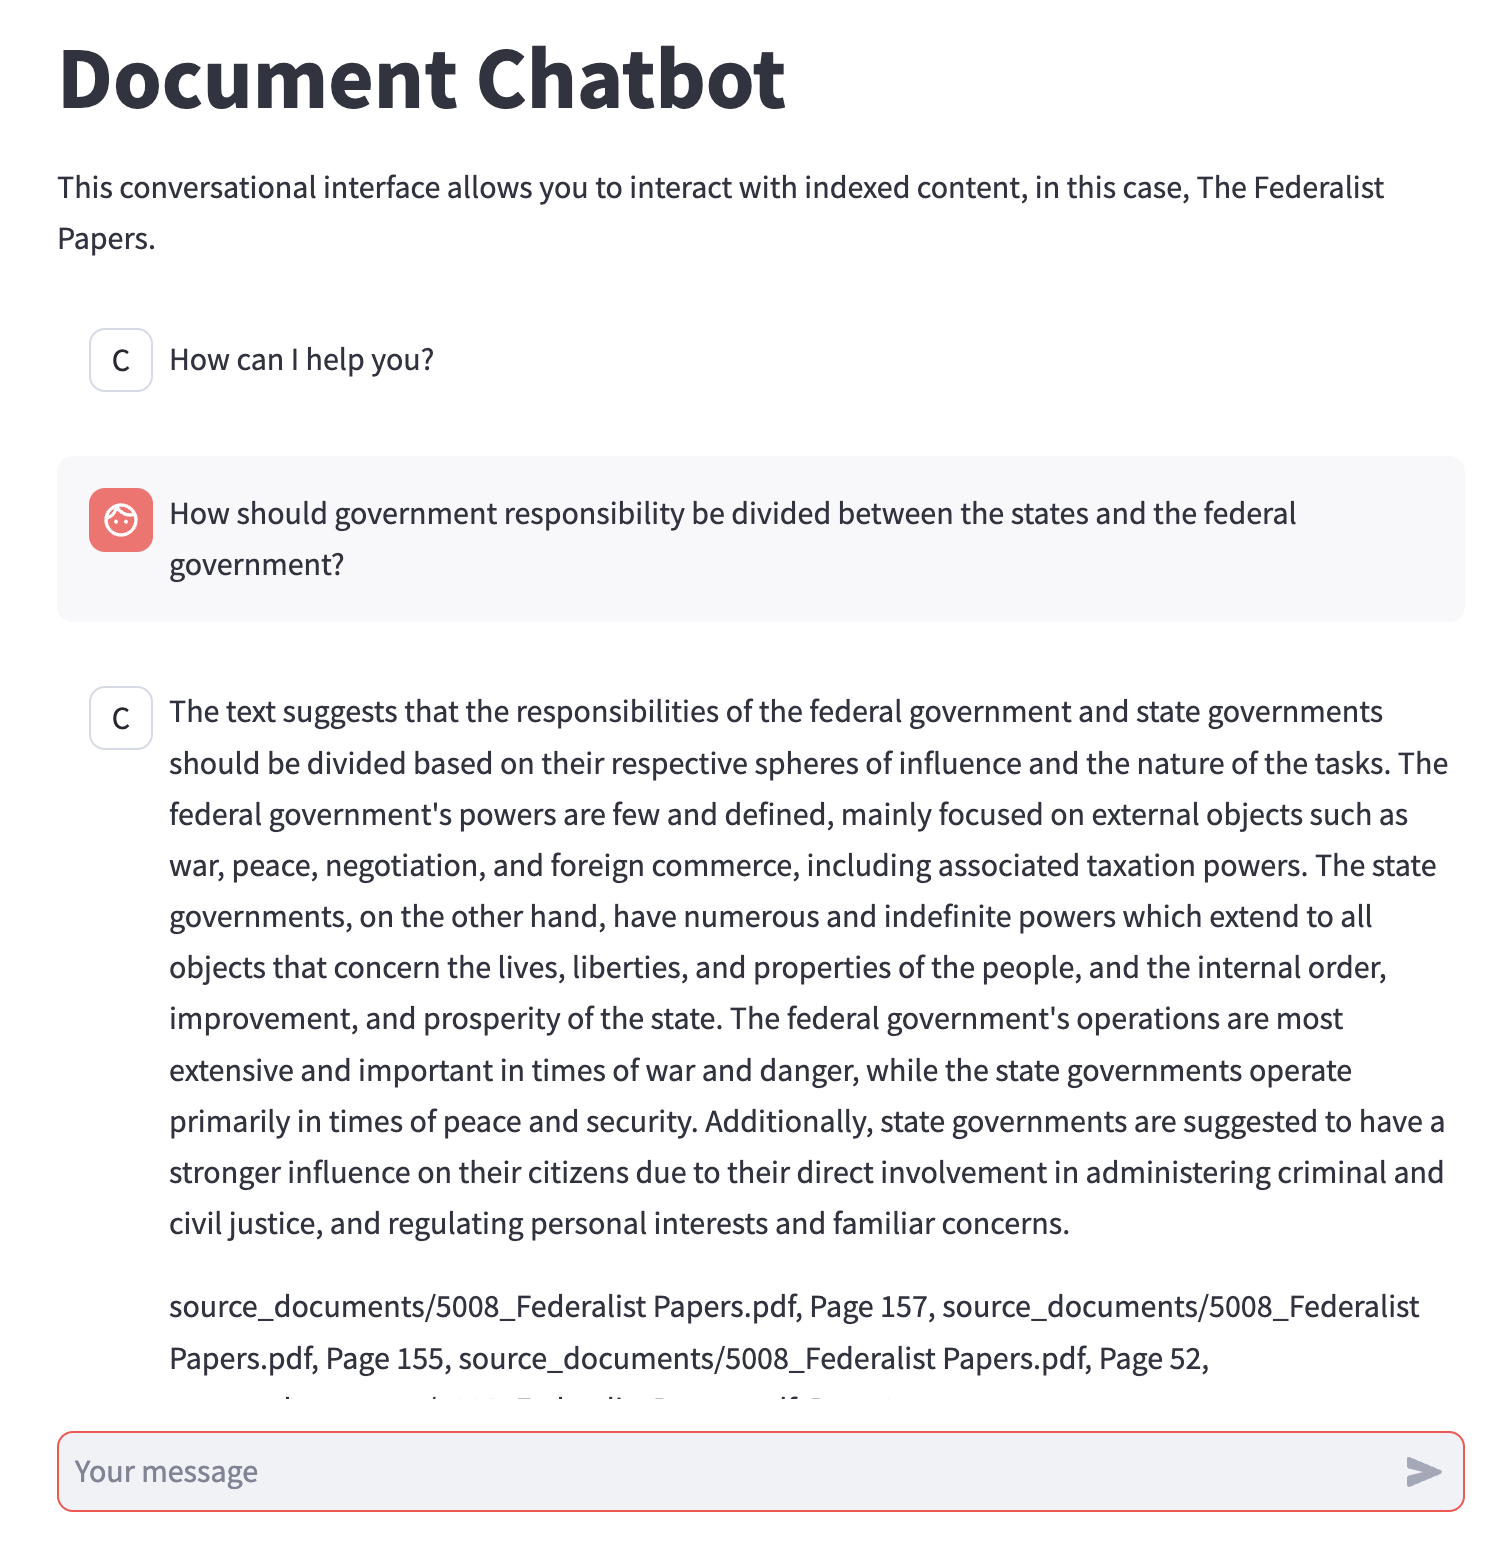 Image of document chatbot UI